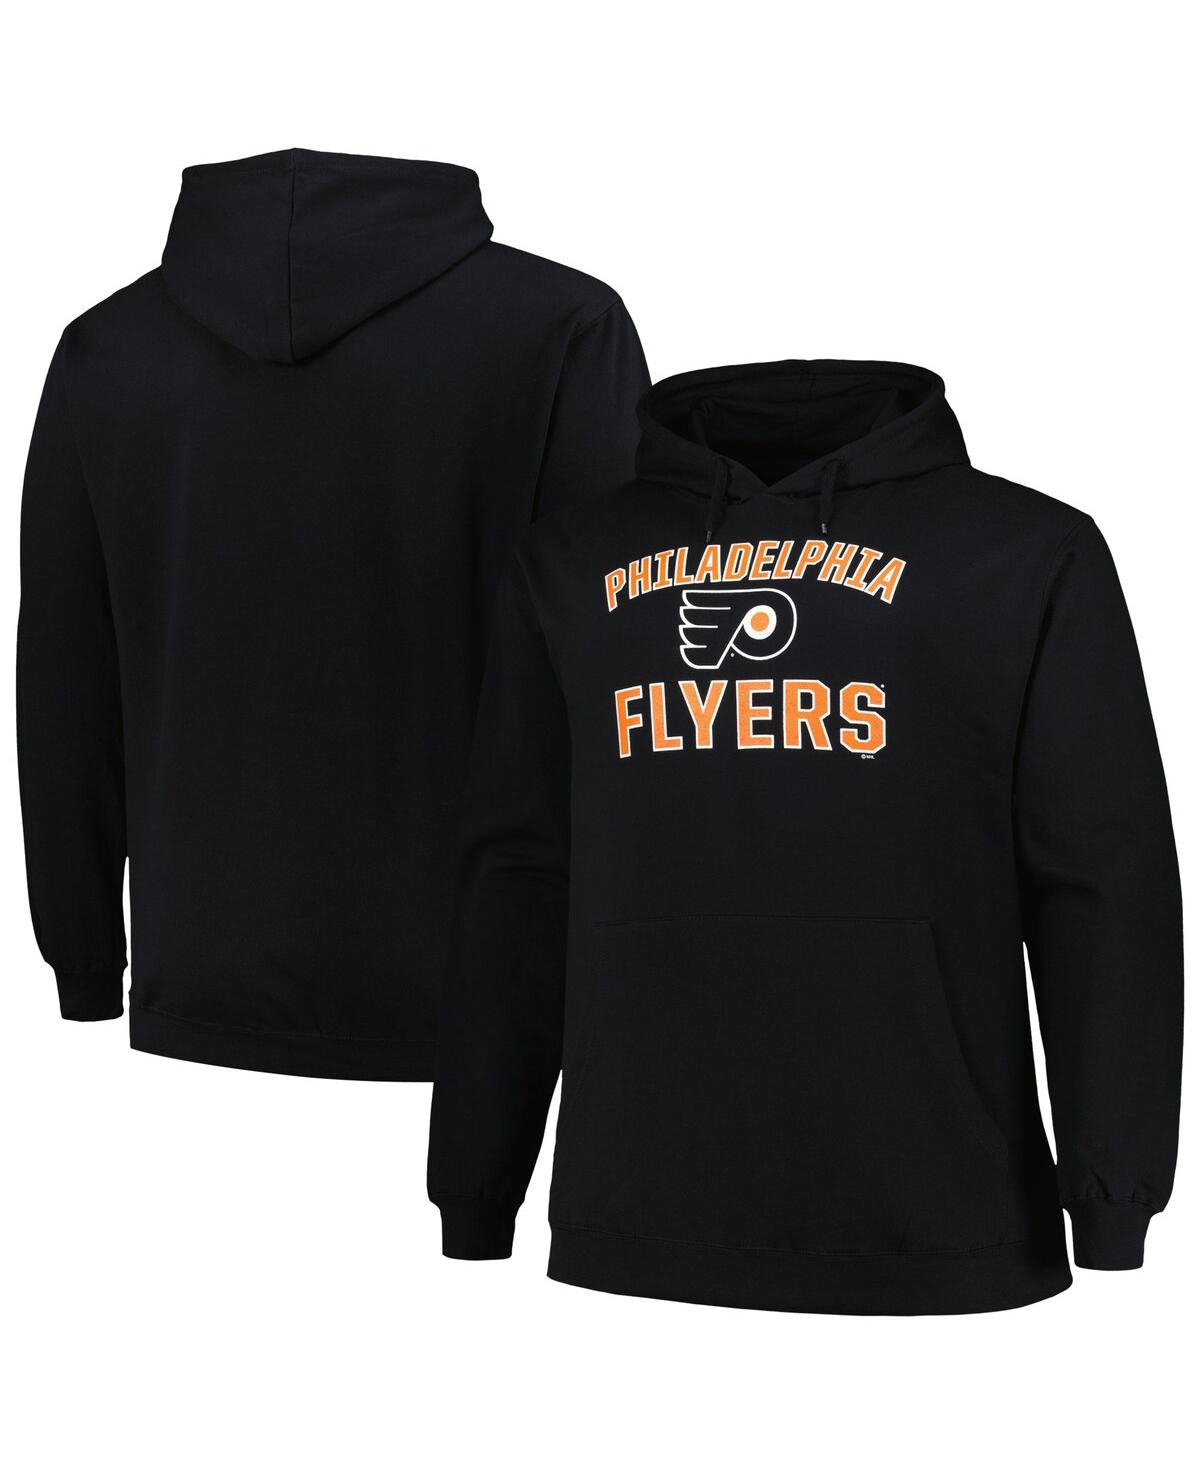 Men's Profile Black Philadelphia Flyers Big and Tall Arch Over Logo Pullover Hoodie - Black